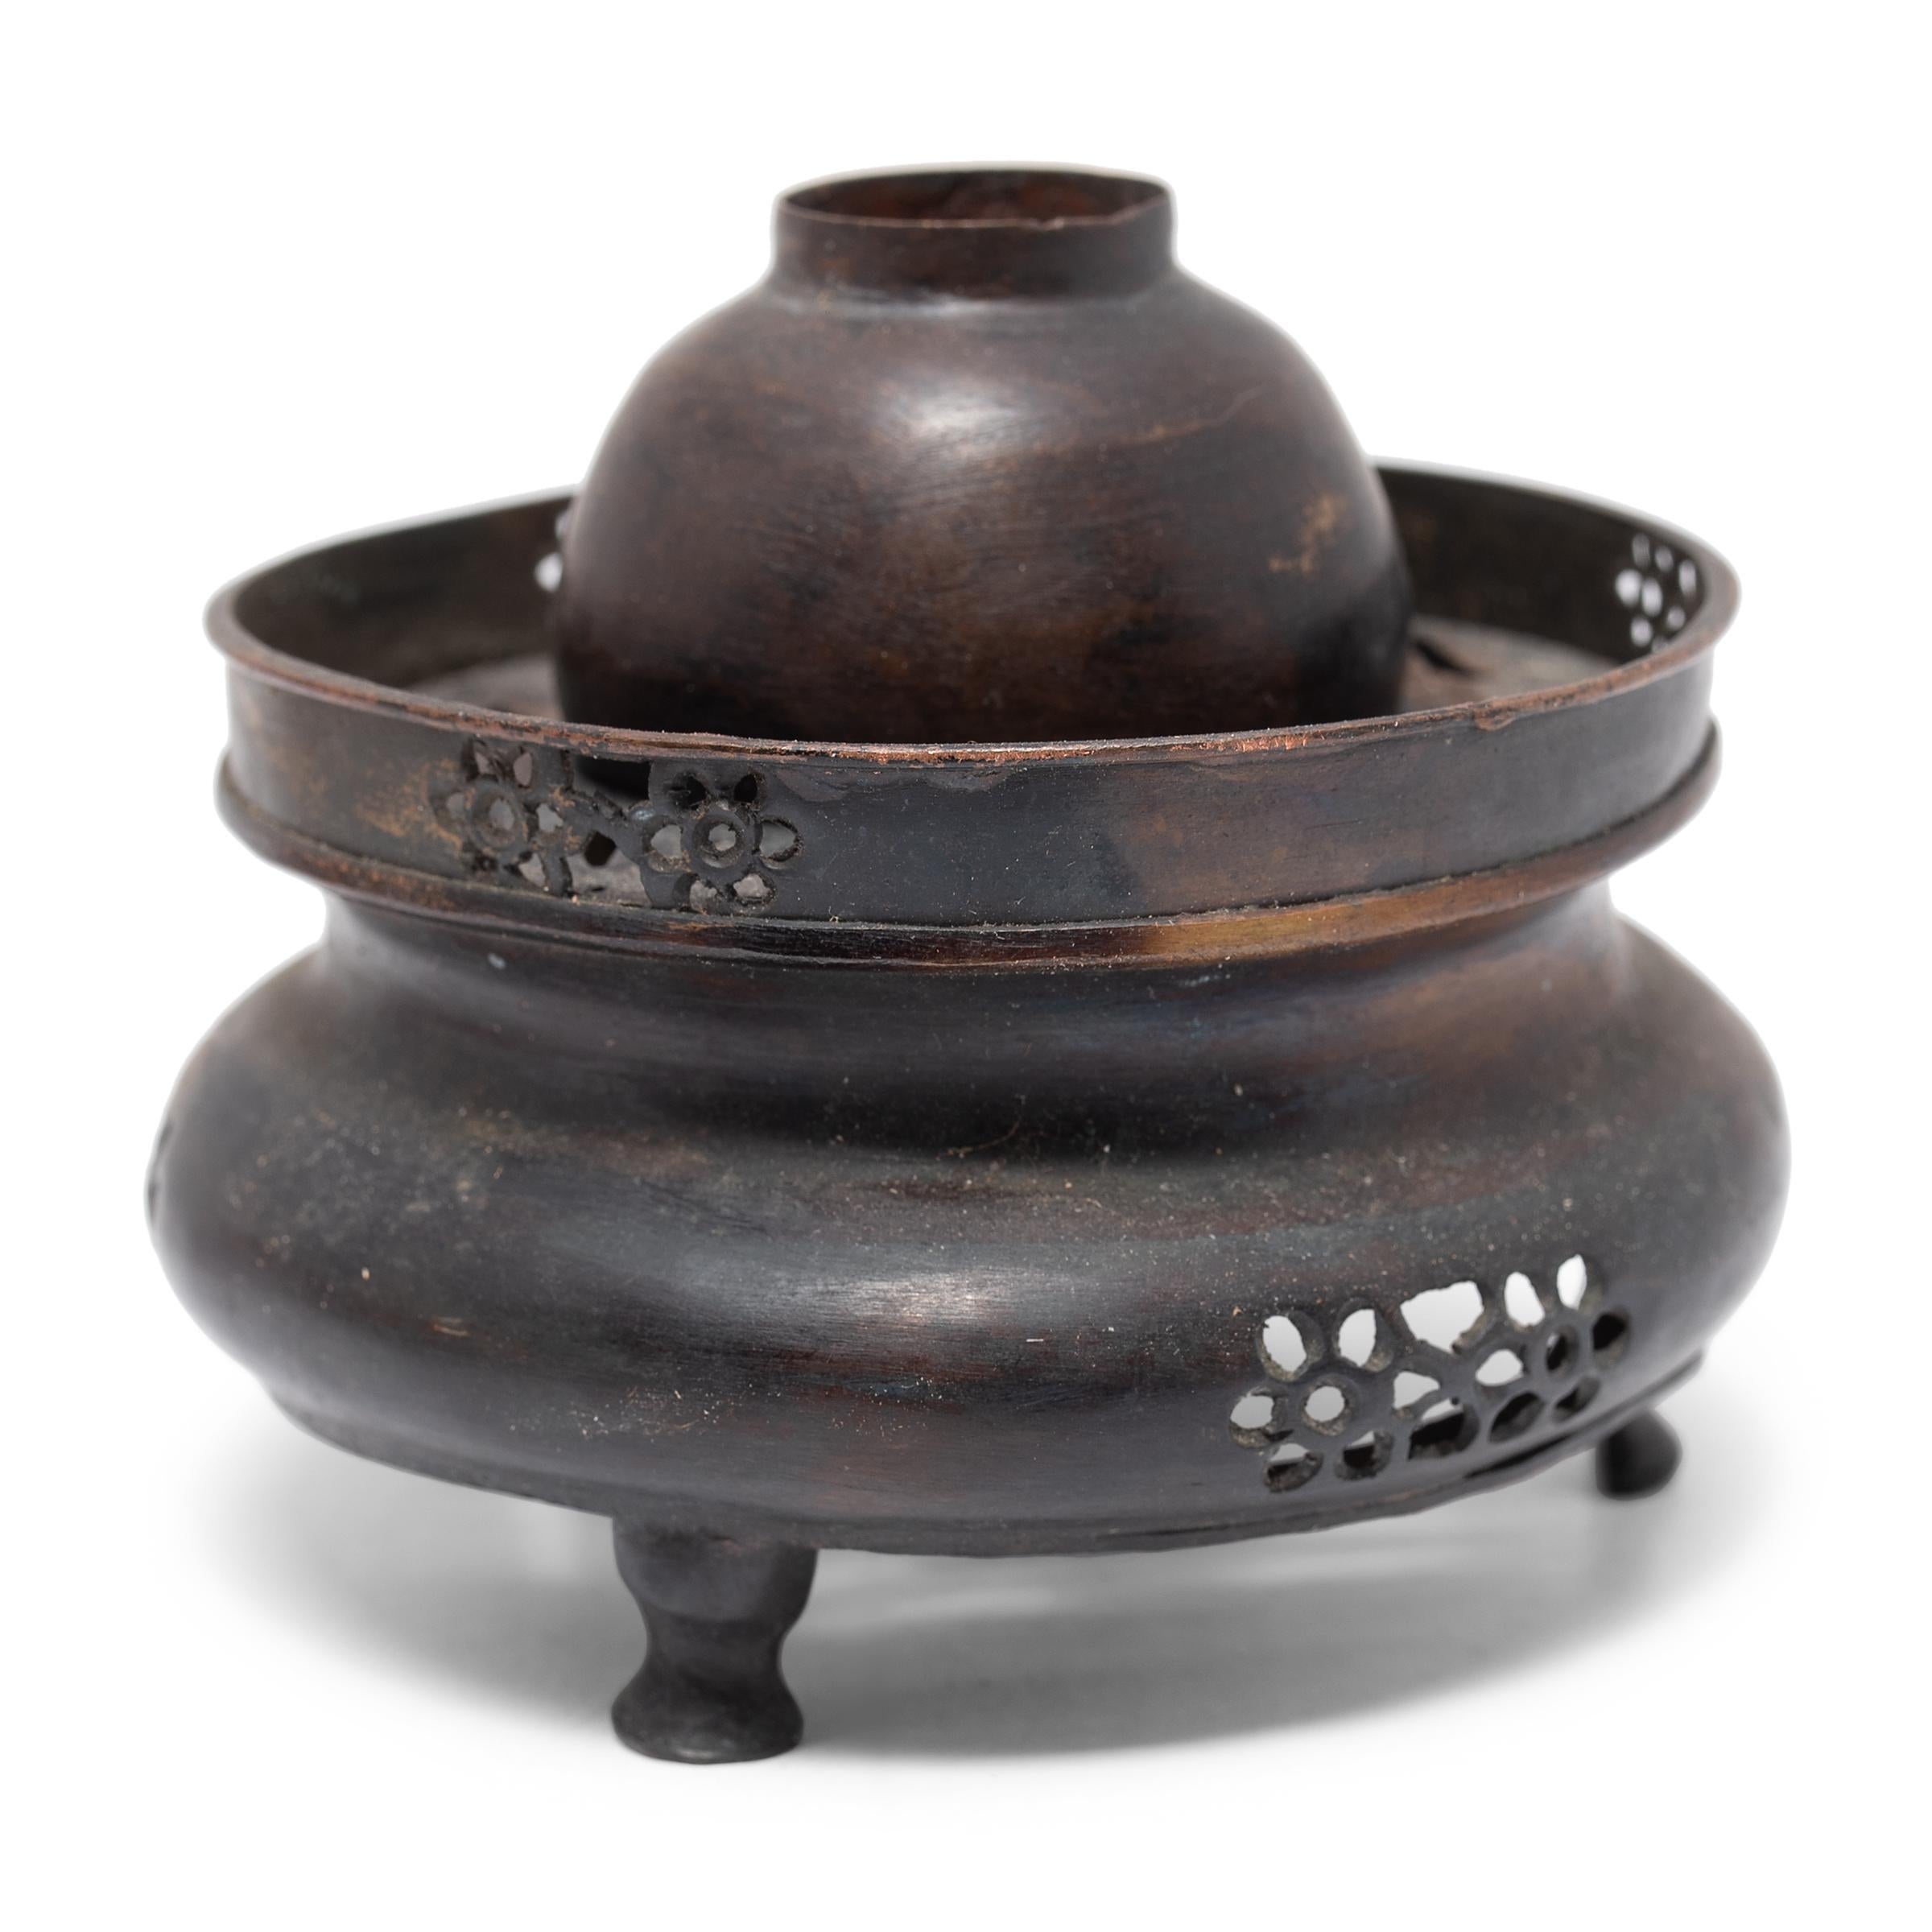 By the 18th century, opium use had become as central to Chinese social life as taking tea or smoking tobacco, fostering a subculture rich with its own customs, traditions, and exquisitely crafted accoutrements. This metal tripod vessel is the base